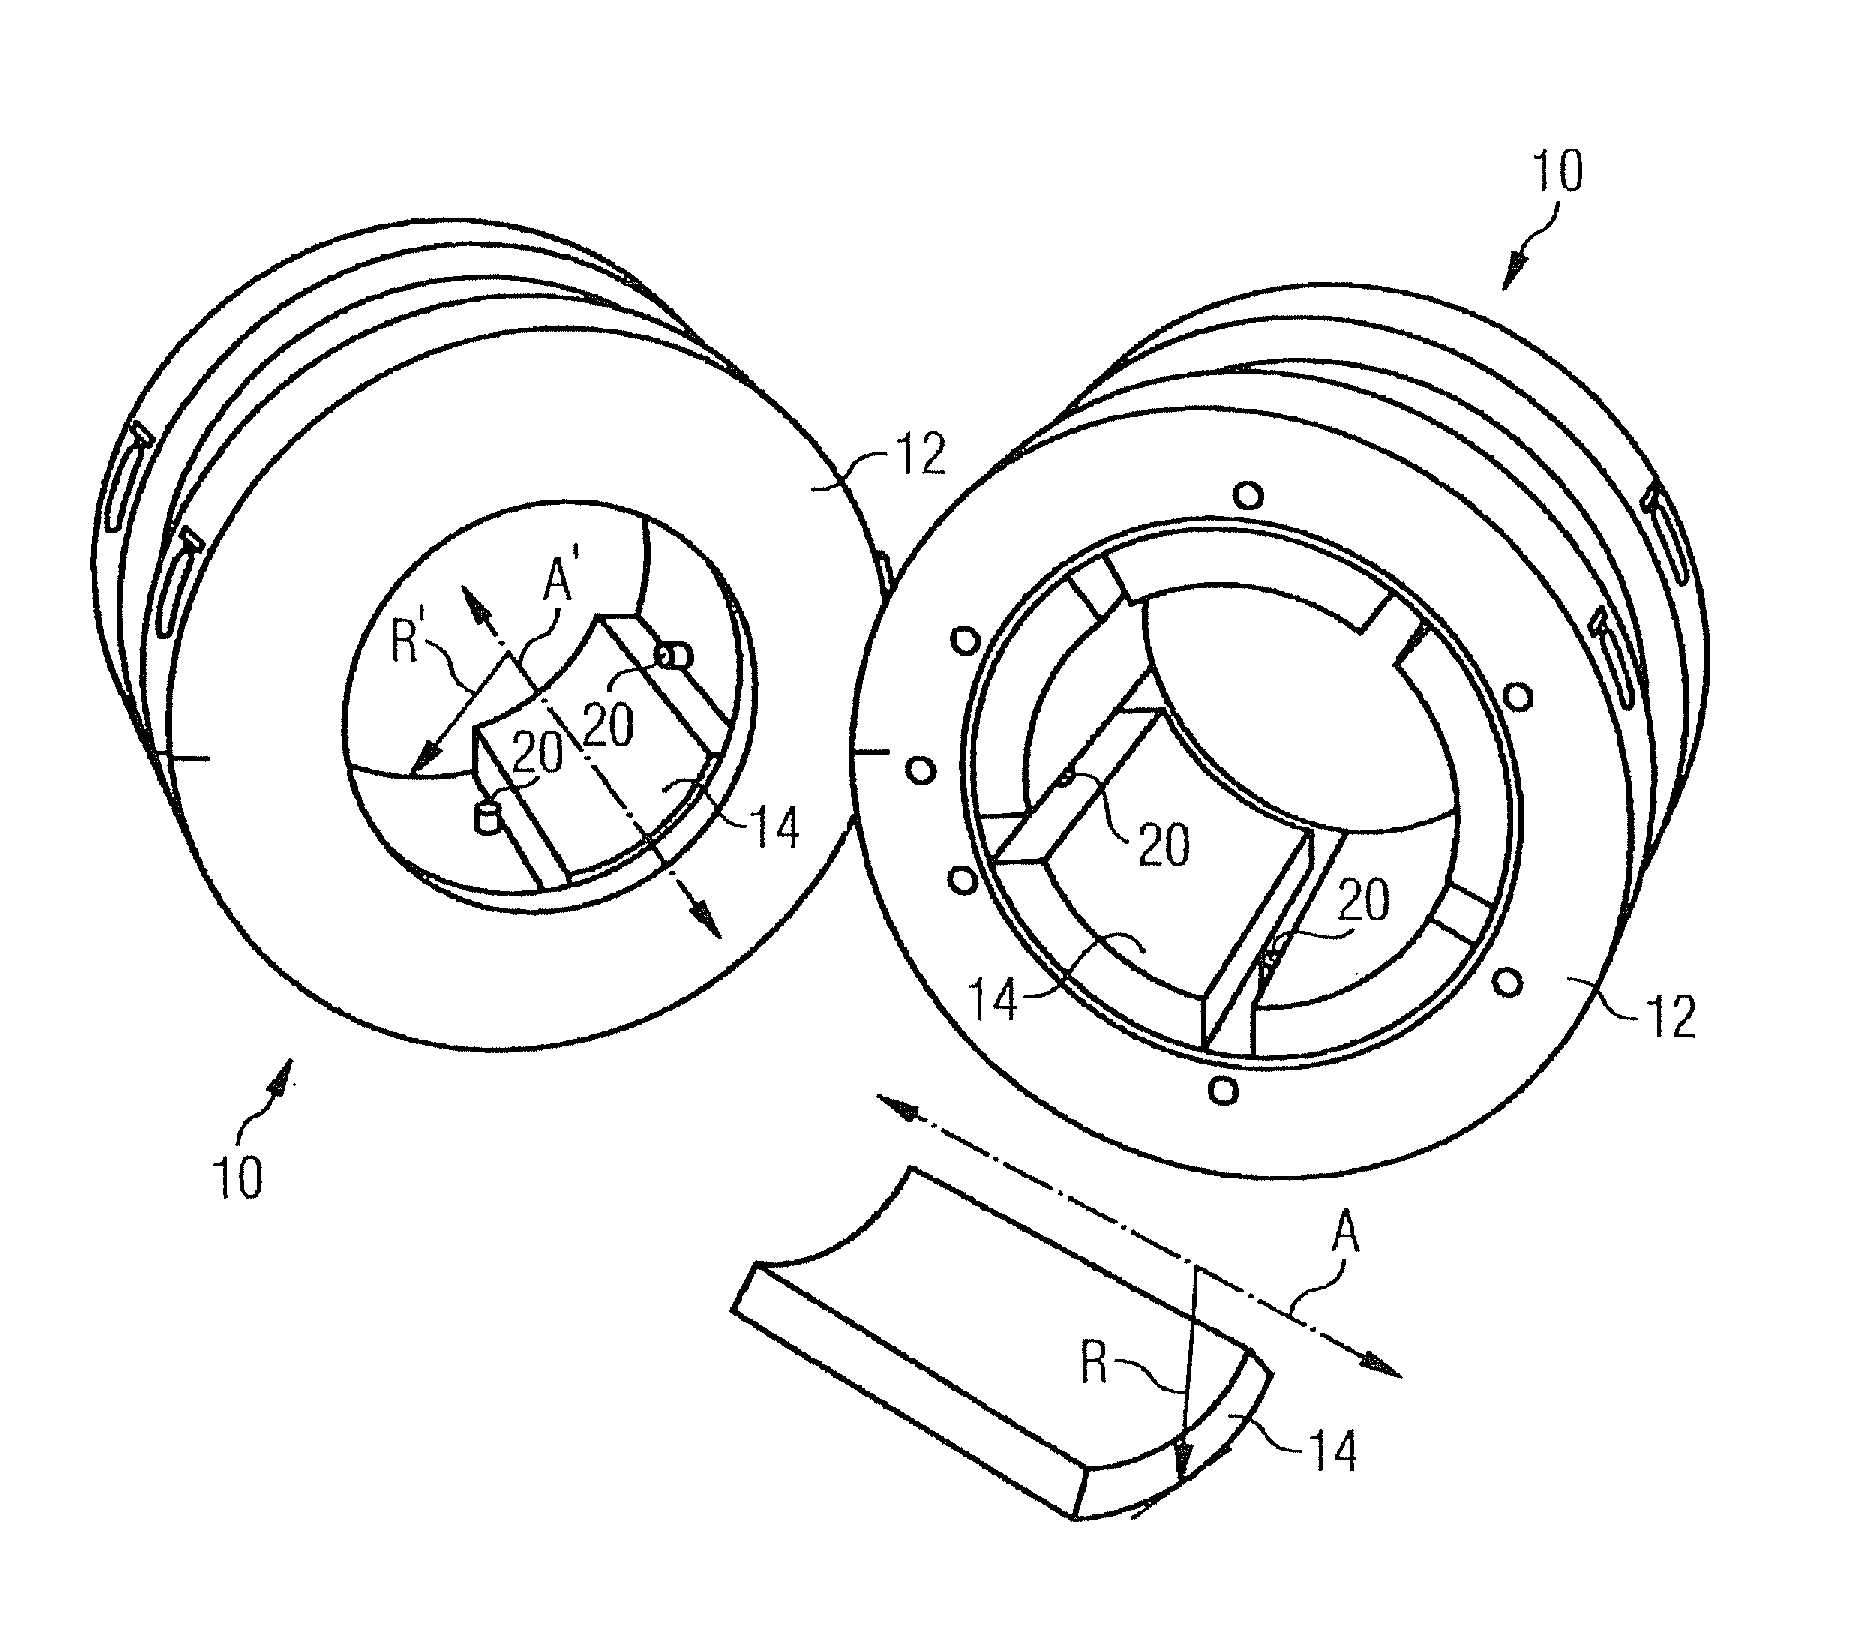 Apparatus for supporting a rotating shaft